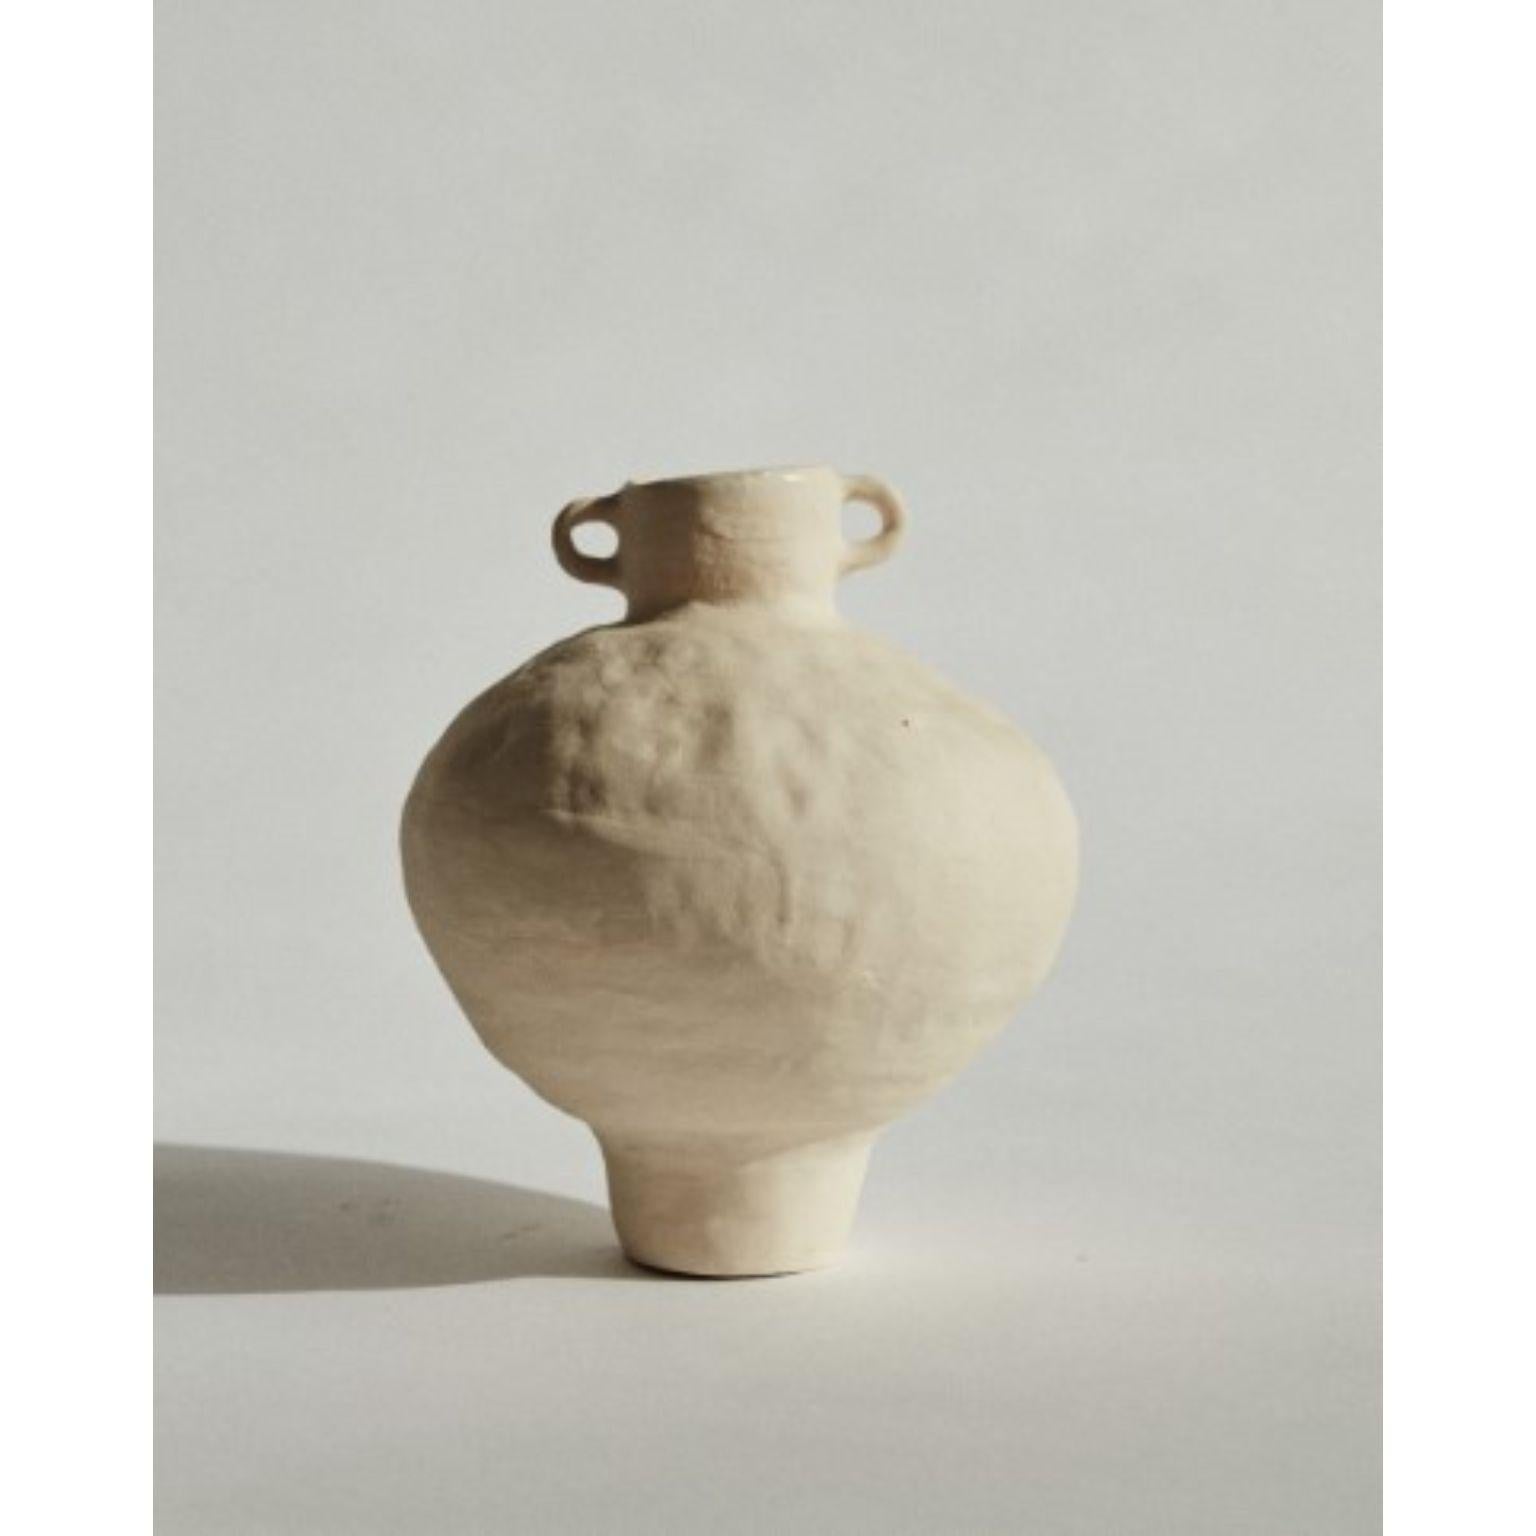 Small amphora in white terracotta by Marta Bonilla
Dimensions: D20 x H25 cm
Materials: Terracotta, Clay

Small Amphora in terracotta: Low temperature hand modeled piece. Enameled inside. Outside it keeps the natural color of the clay, straw